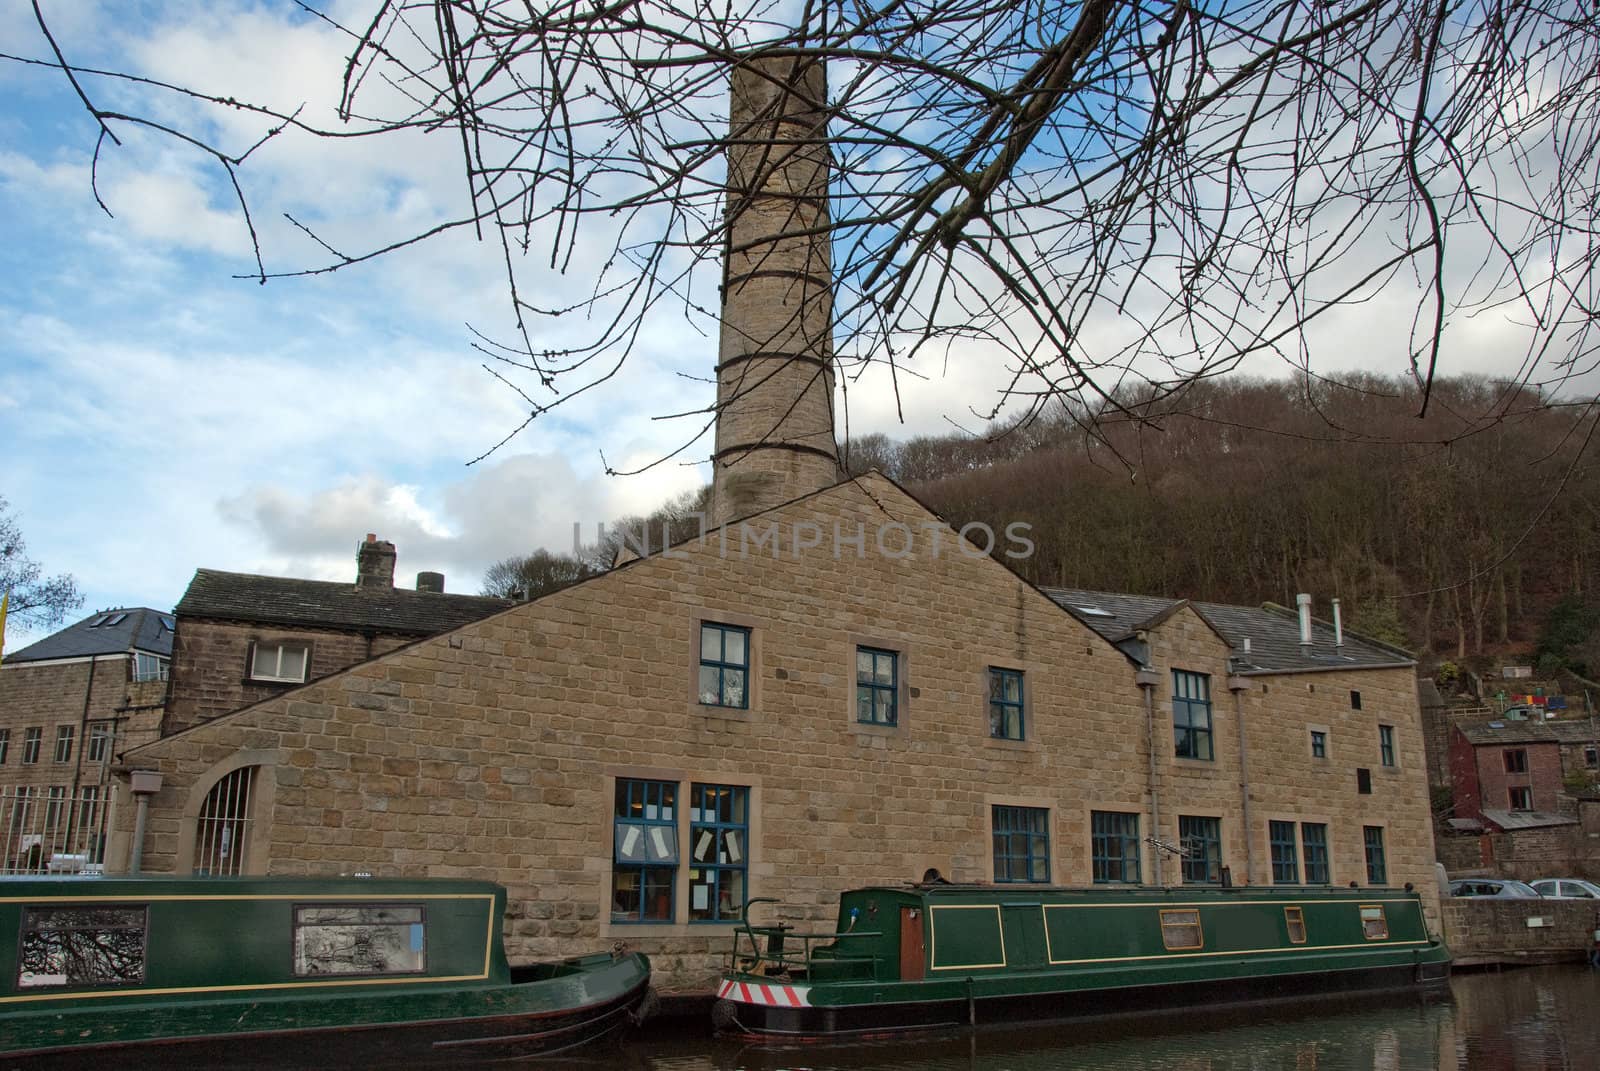 An Old Woolen Mill and Barges on the Rochdale Canal at Hebden Bridge Yorkshire